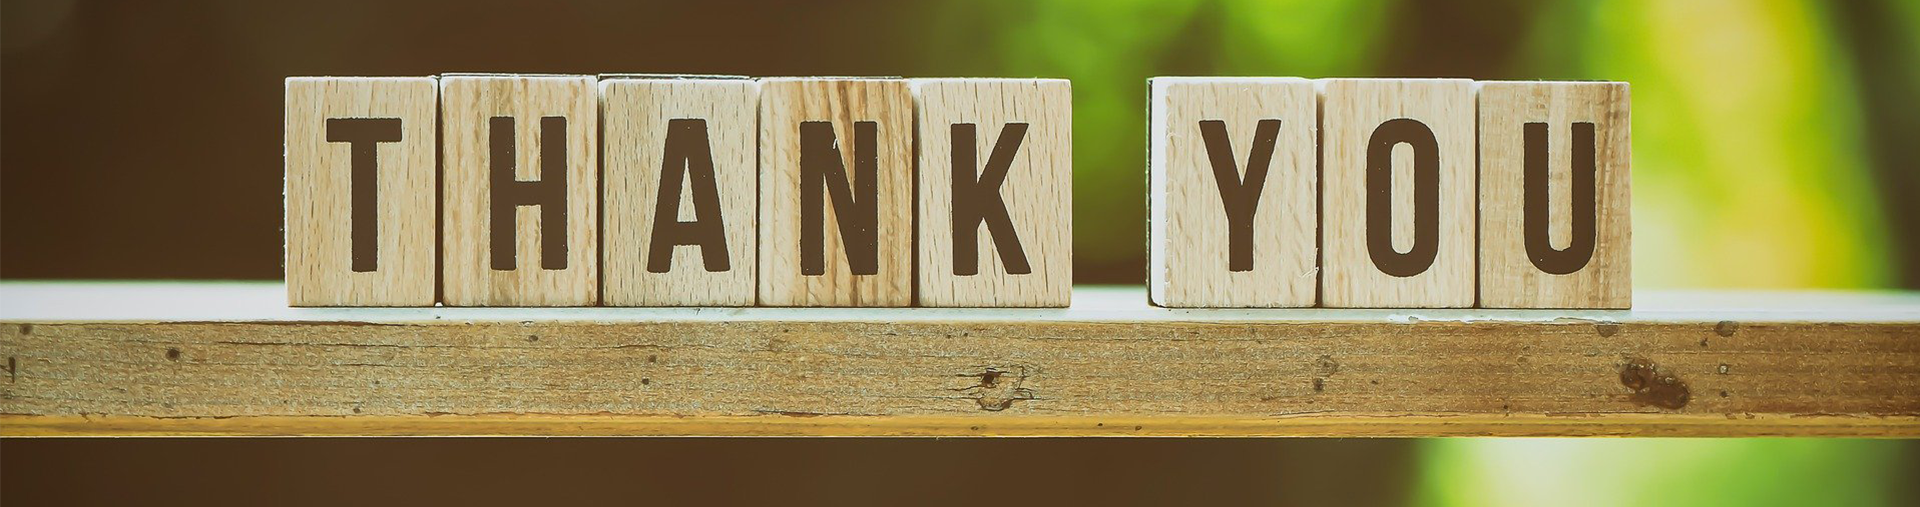 4 Ways to Show Appreciation in the Workplace